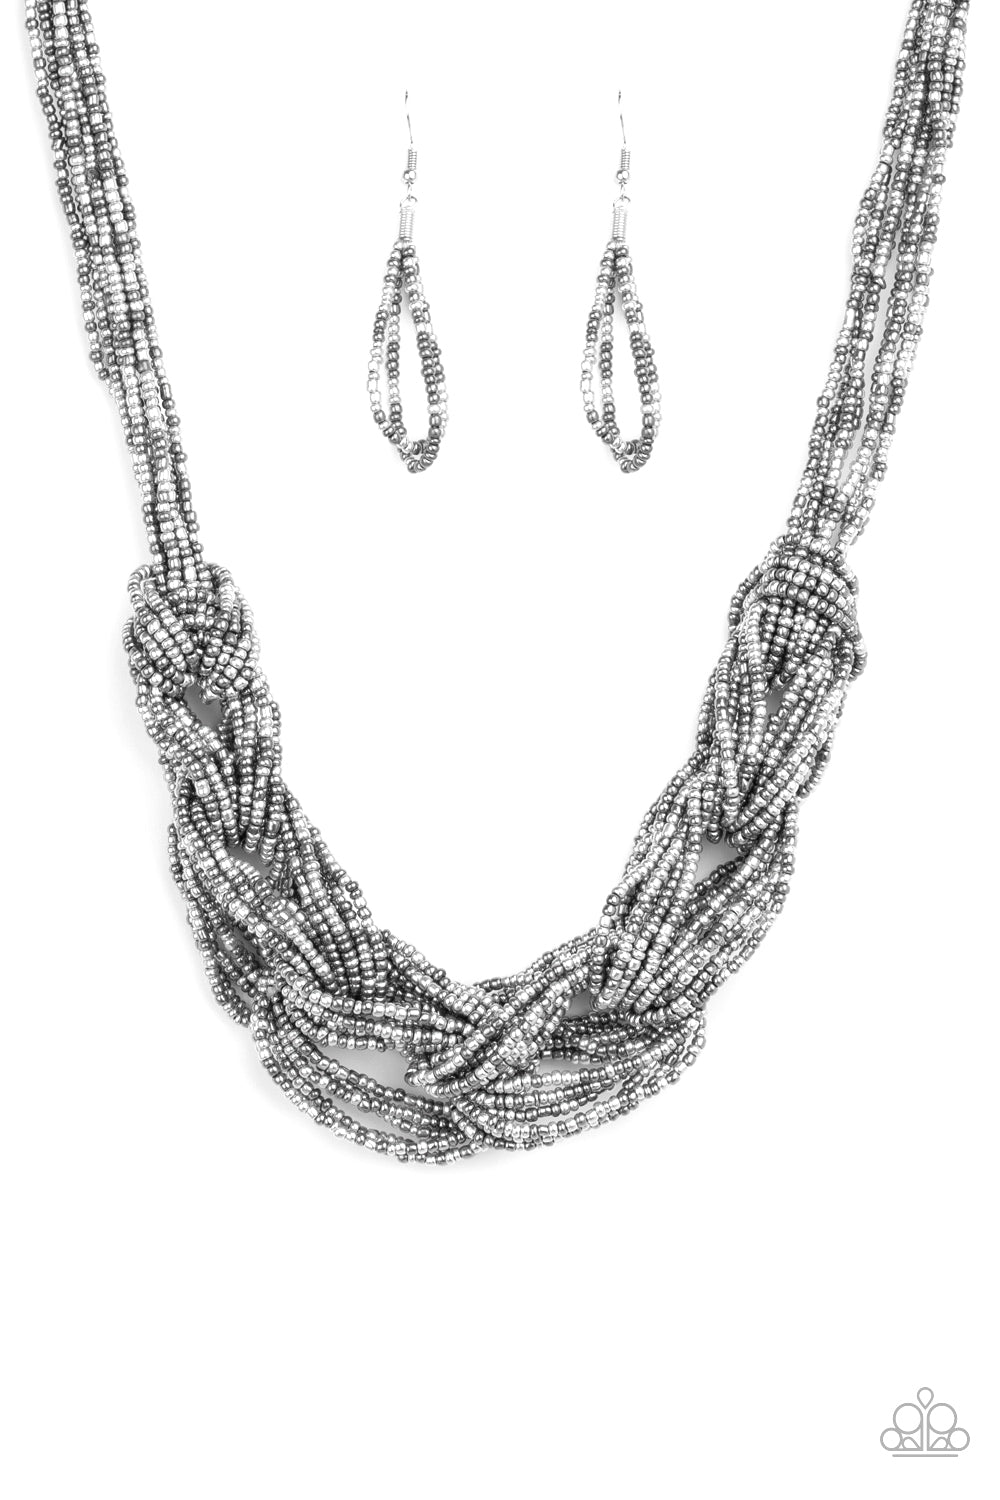 City Catwalk - Silver Seed Bead Necklace - Paparazzi Accessories -  Brushed in a flashy finish, countless strands of silver and gunmetal seed beads weave into a bulky square braid below the collar for a glamorous look. Features an adjustable clasp closure. Sold as one individual necklace. 